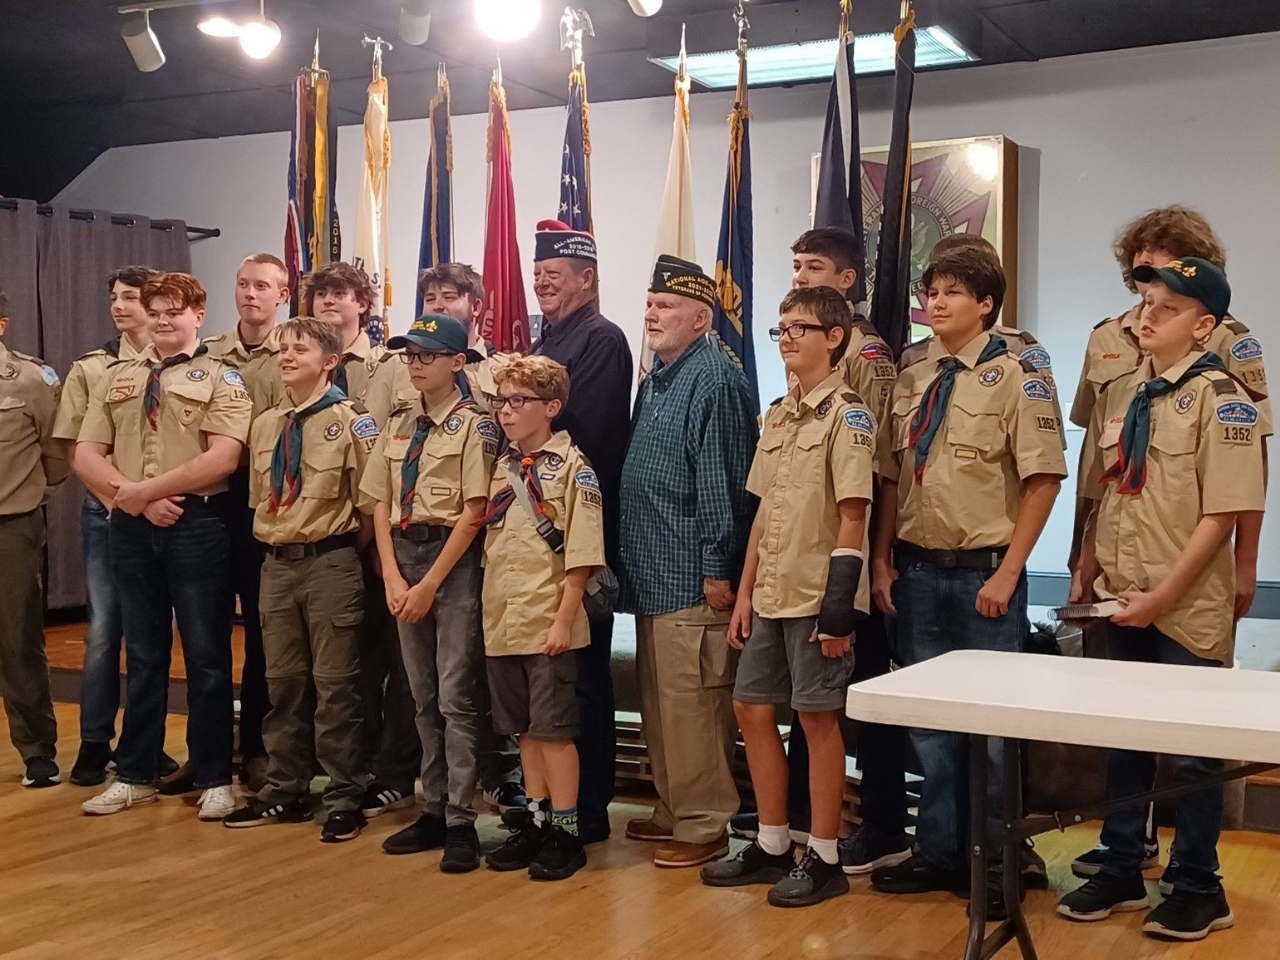 Caleb Eklund built and Troop 1352 presented a nine-flag stand was presented to VFW Post 7916 